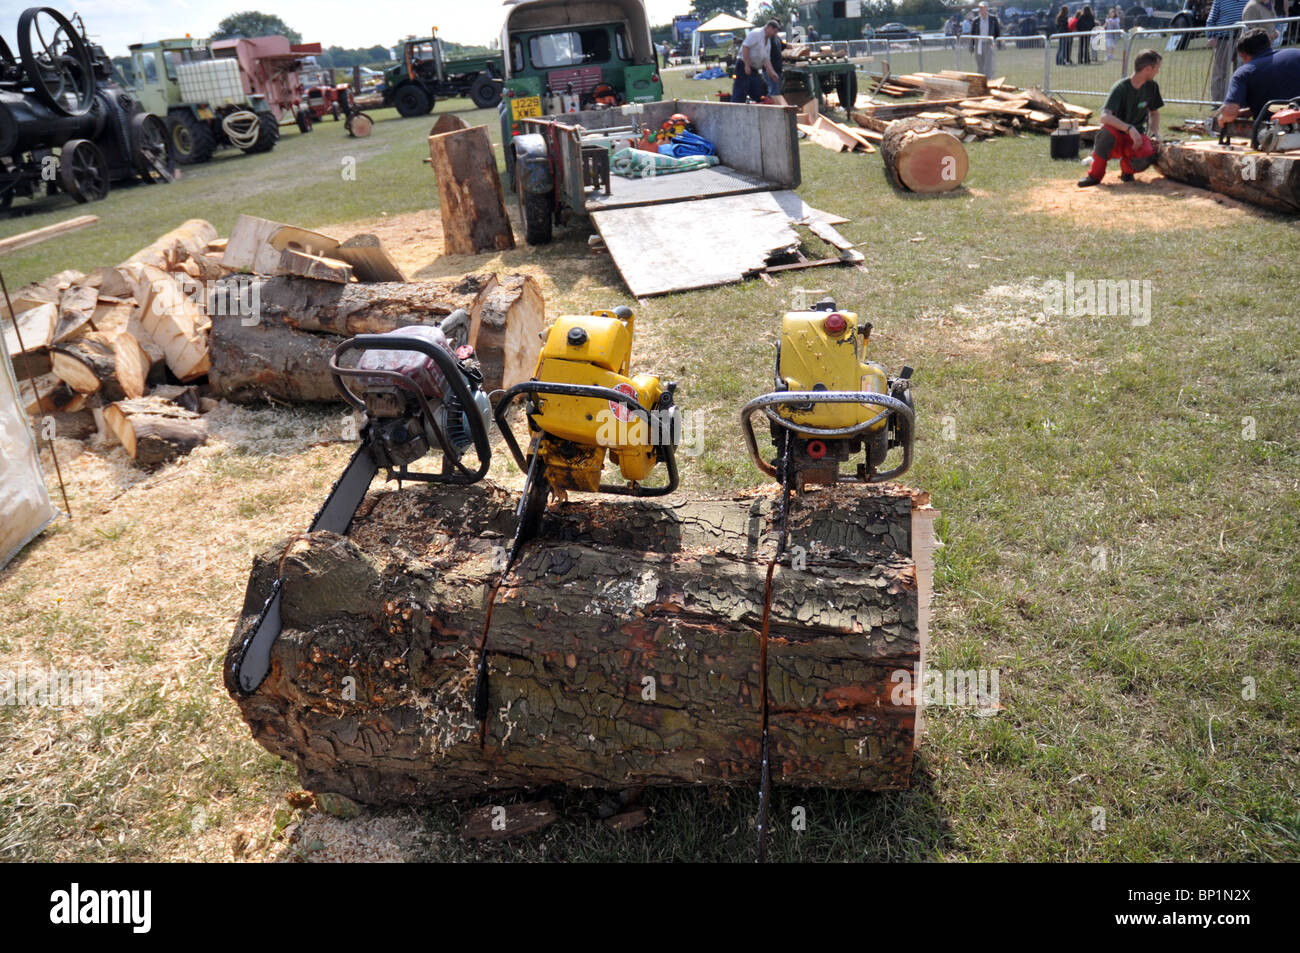 a display of commercial chainsaws safely placed in a large trunk of wood at the kemble steam rally 2010 Stock Photo